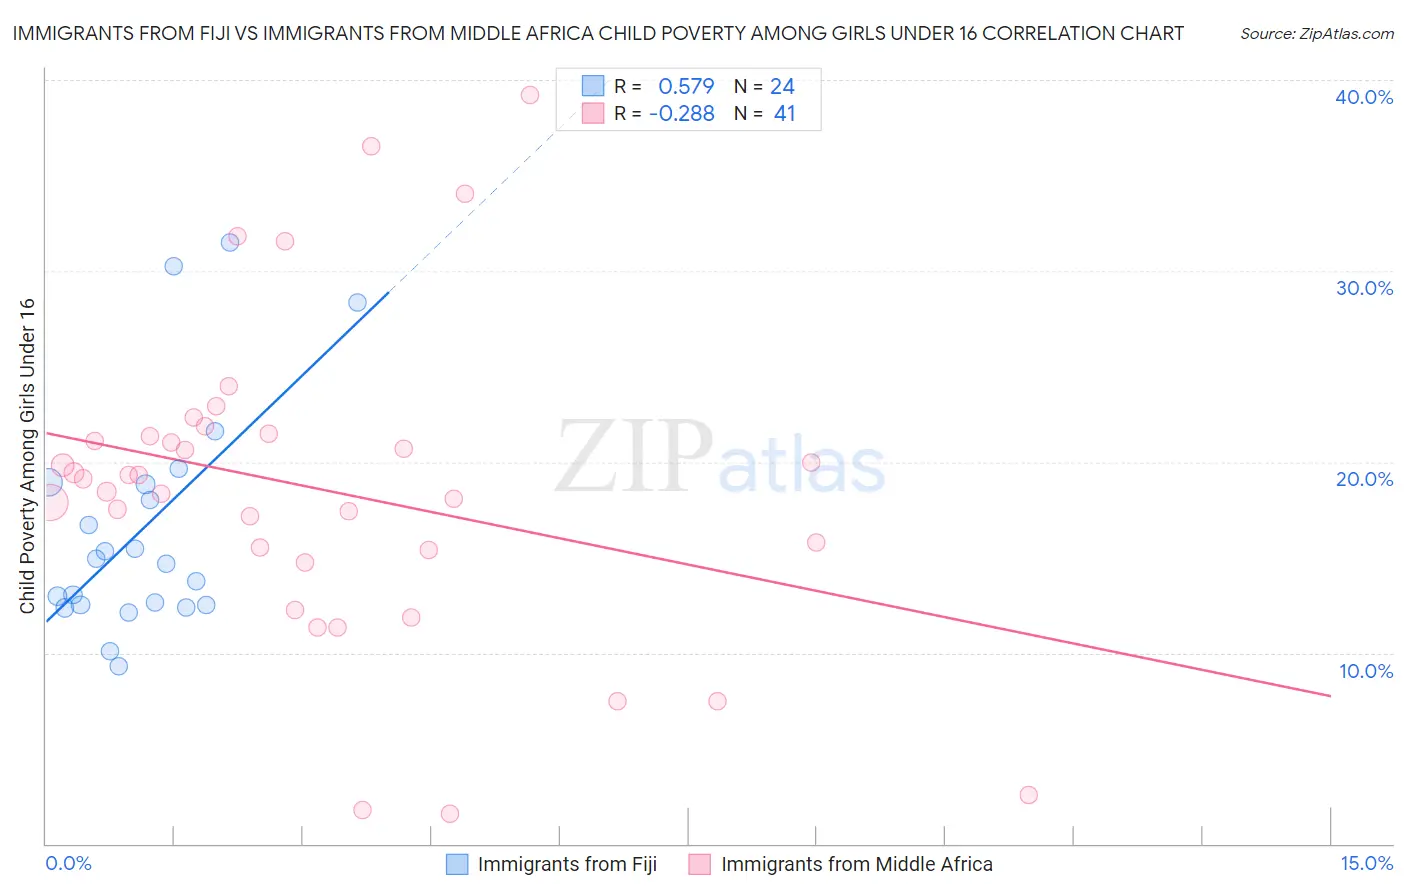 Immigrants from Fiji vs Immigrants from Middle Africa Child Poverty Among Girls Under 16